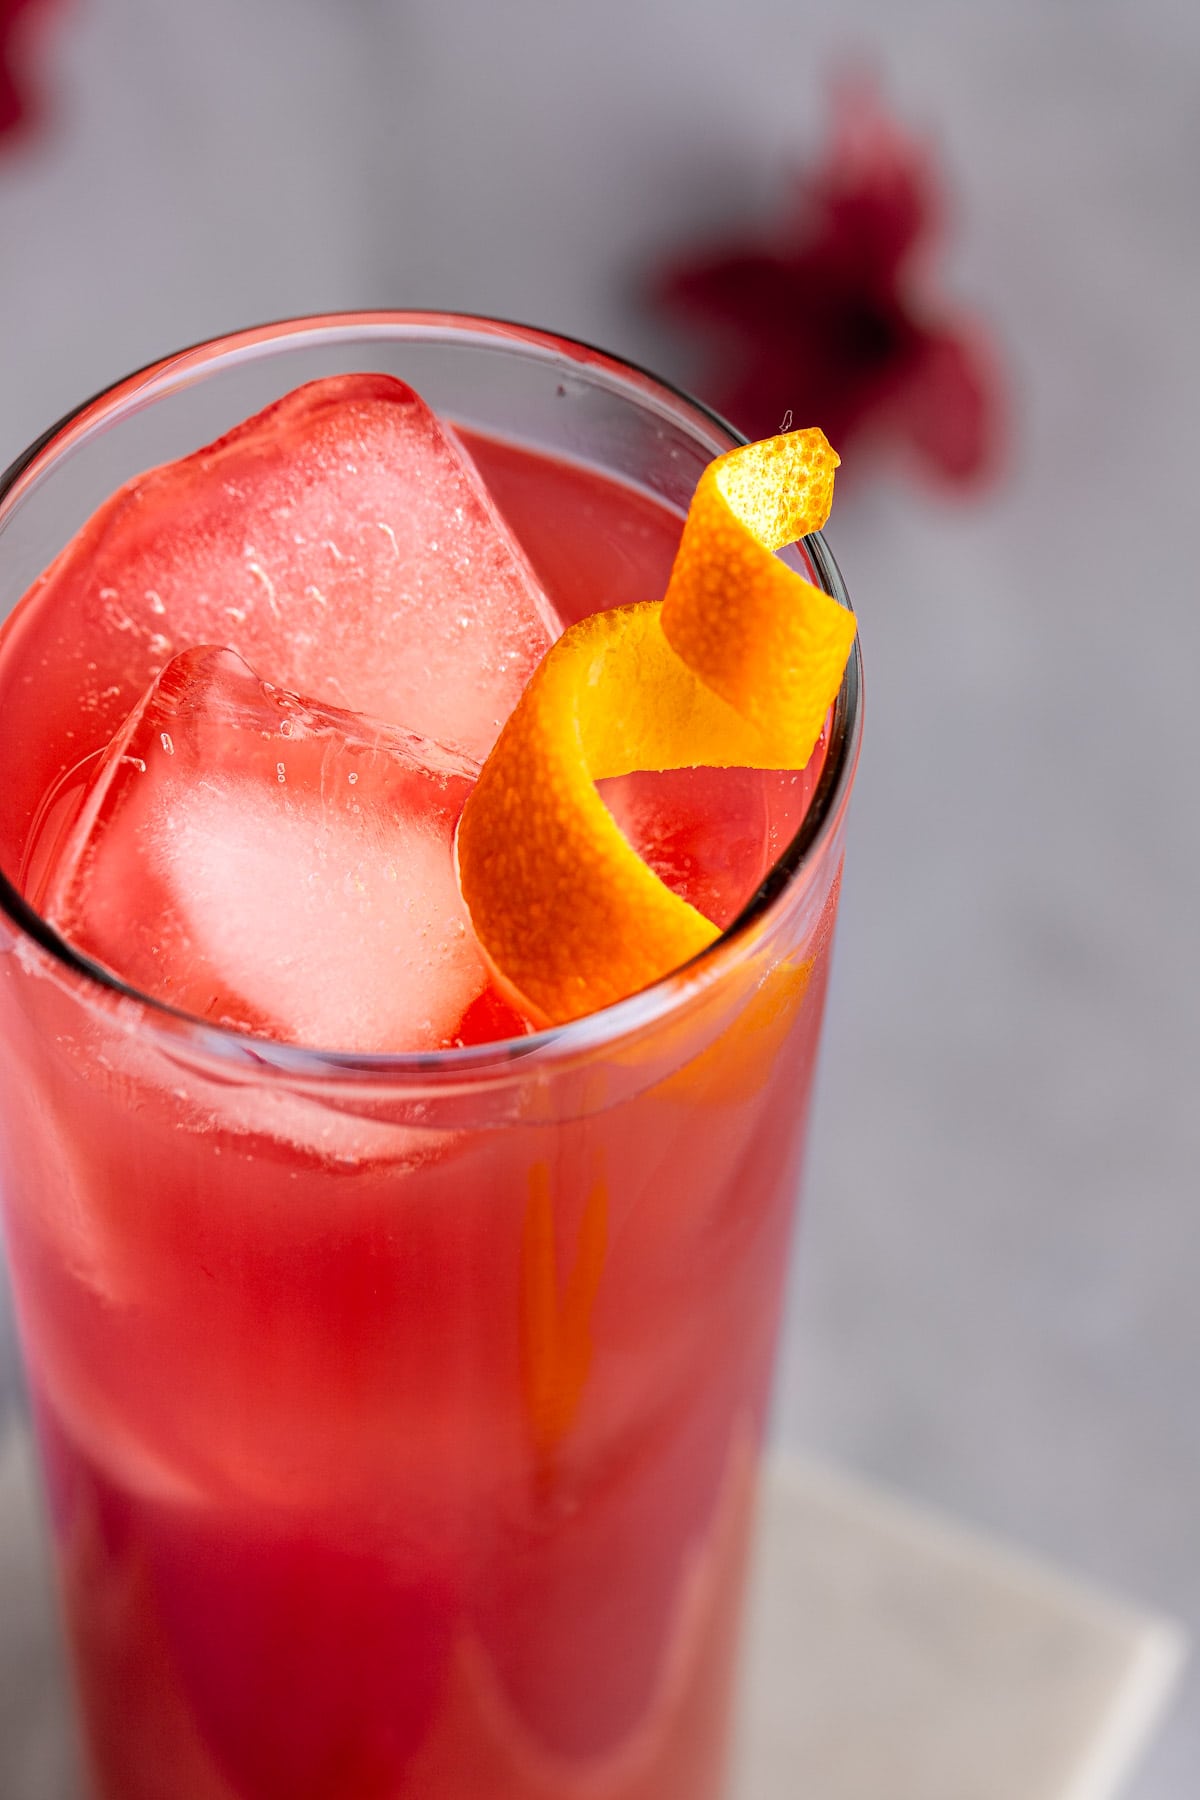 Up close view of a reddish-pink madras cocktail, garnished with an orange peel twist.